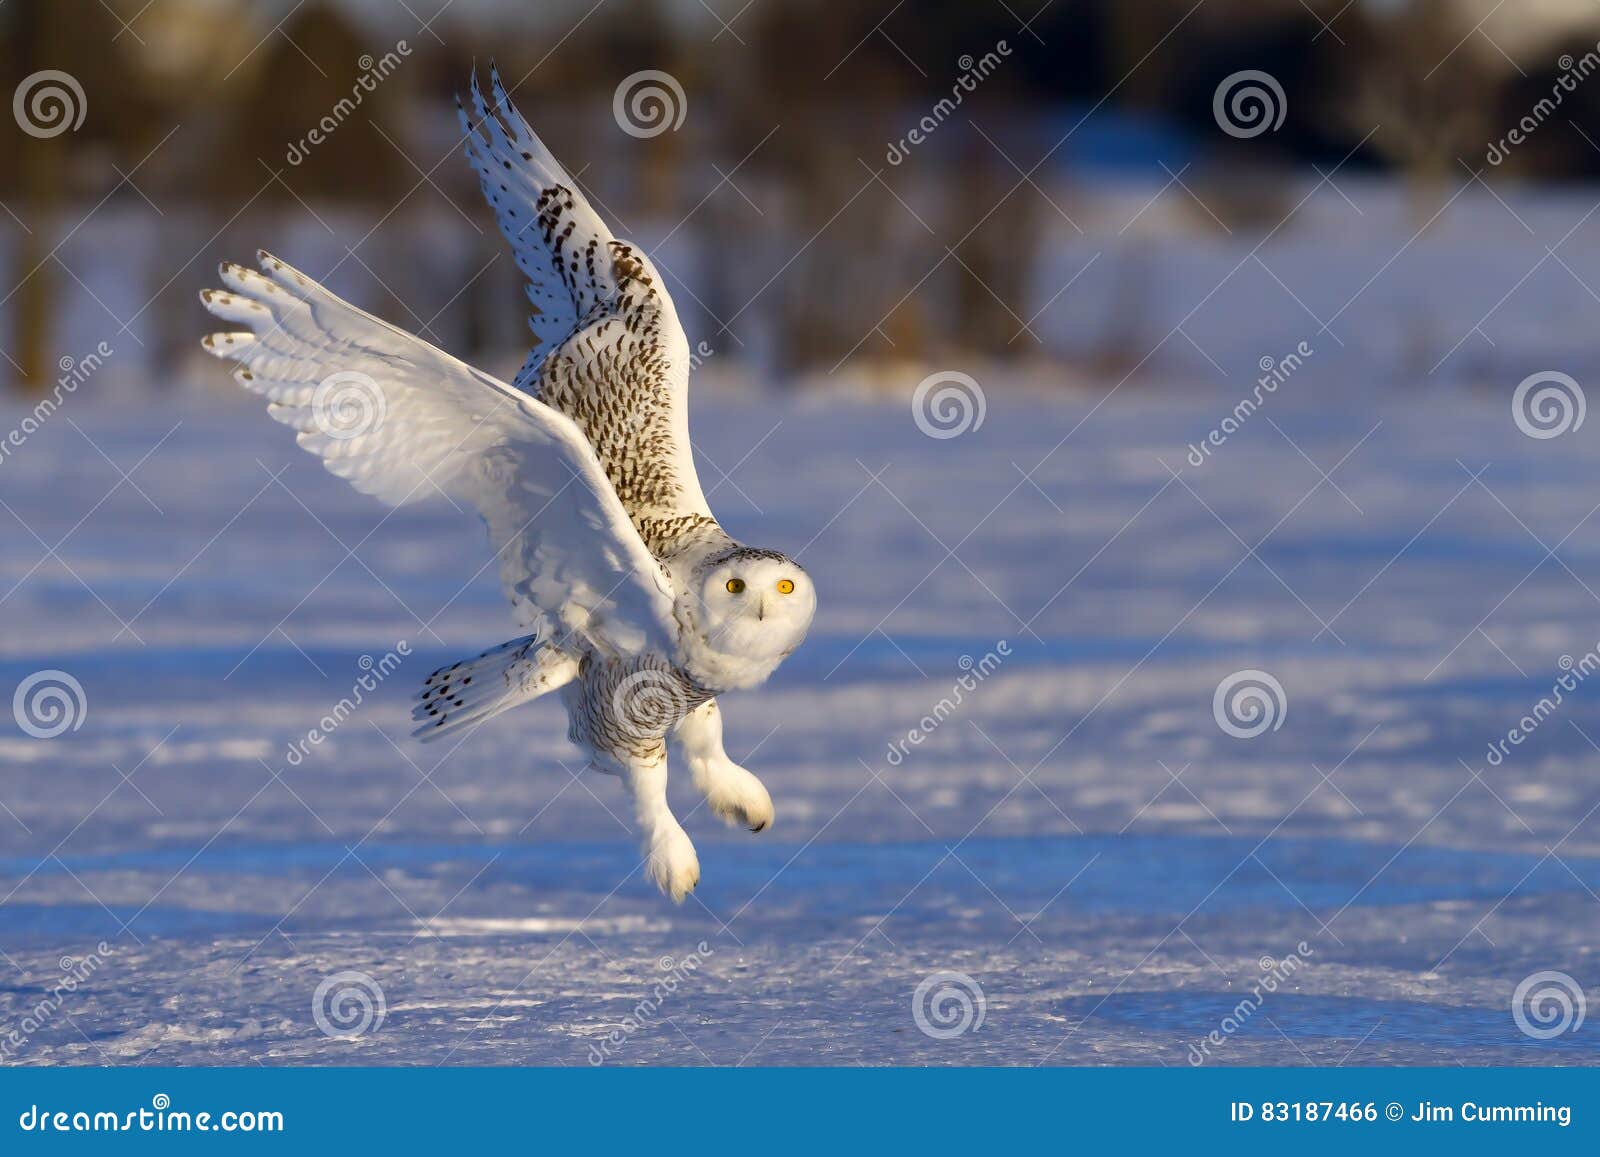 snowy owl (bubo scandiacus) takes flight to hunt over a snow covered field in canada